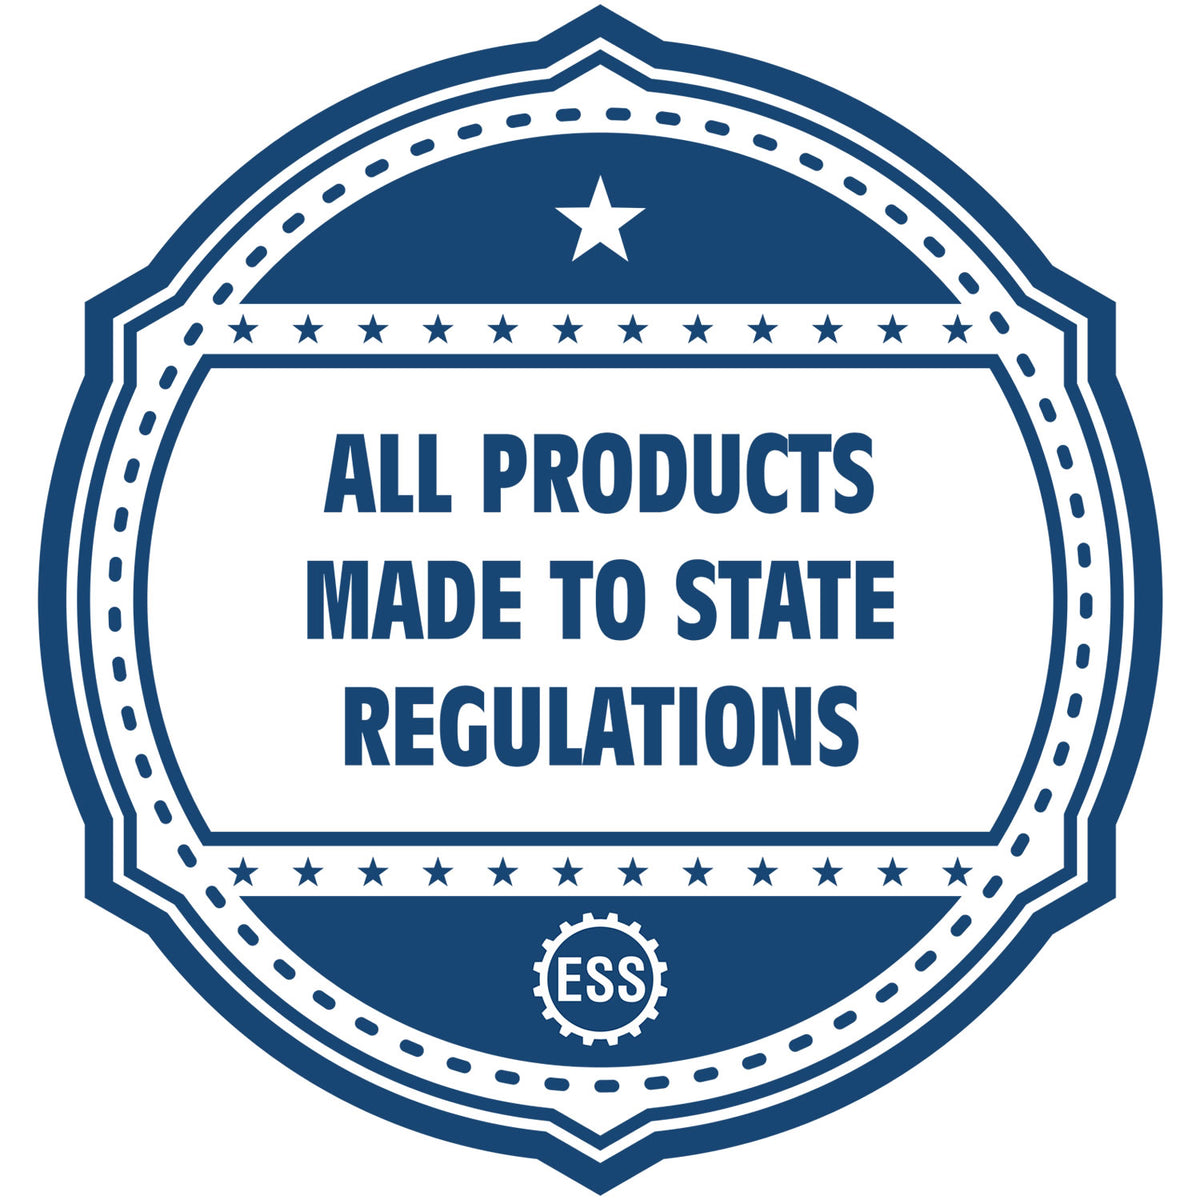 An icon or badge element for the Florida Desk Architect Embossing Seal showing that this product is made in compliance with state regulations.